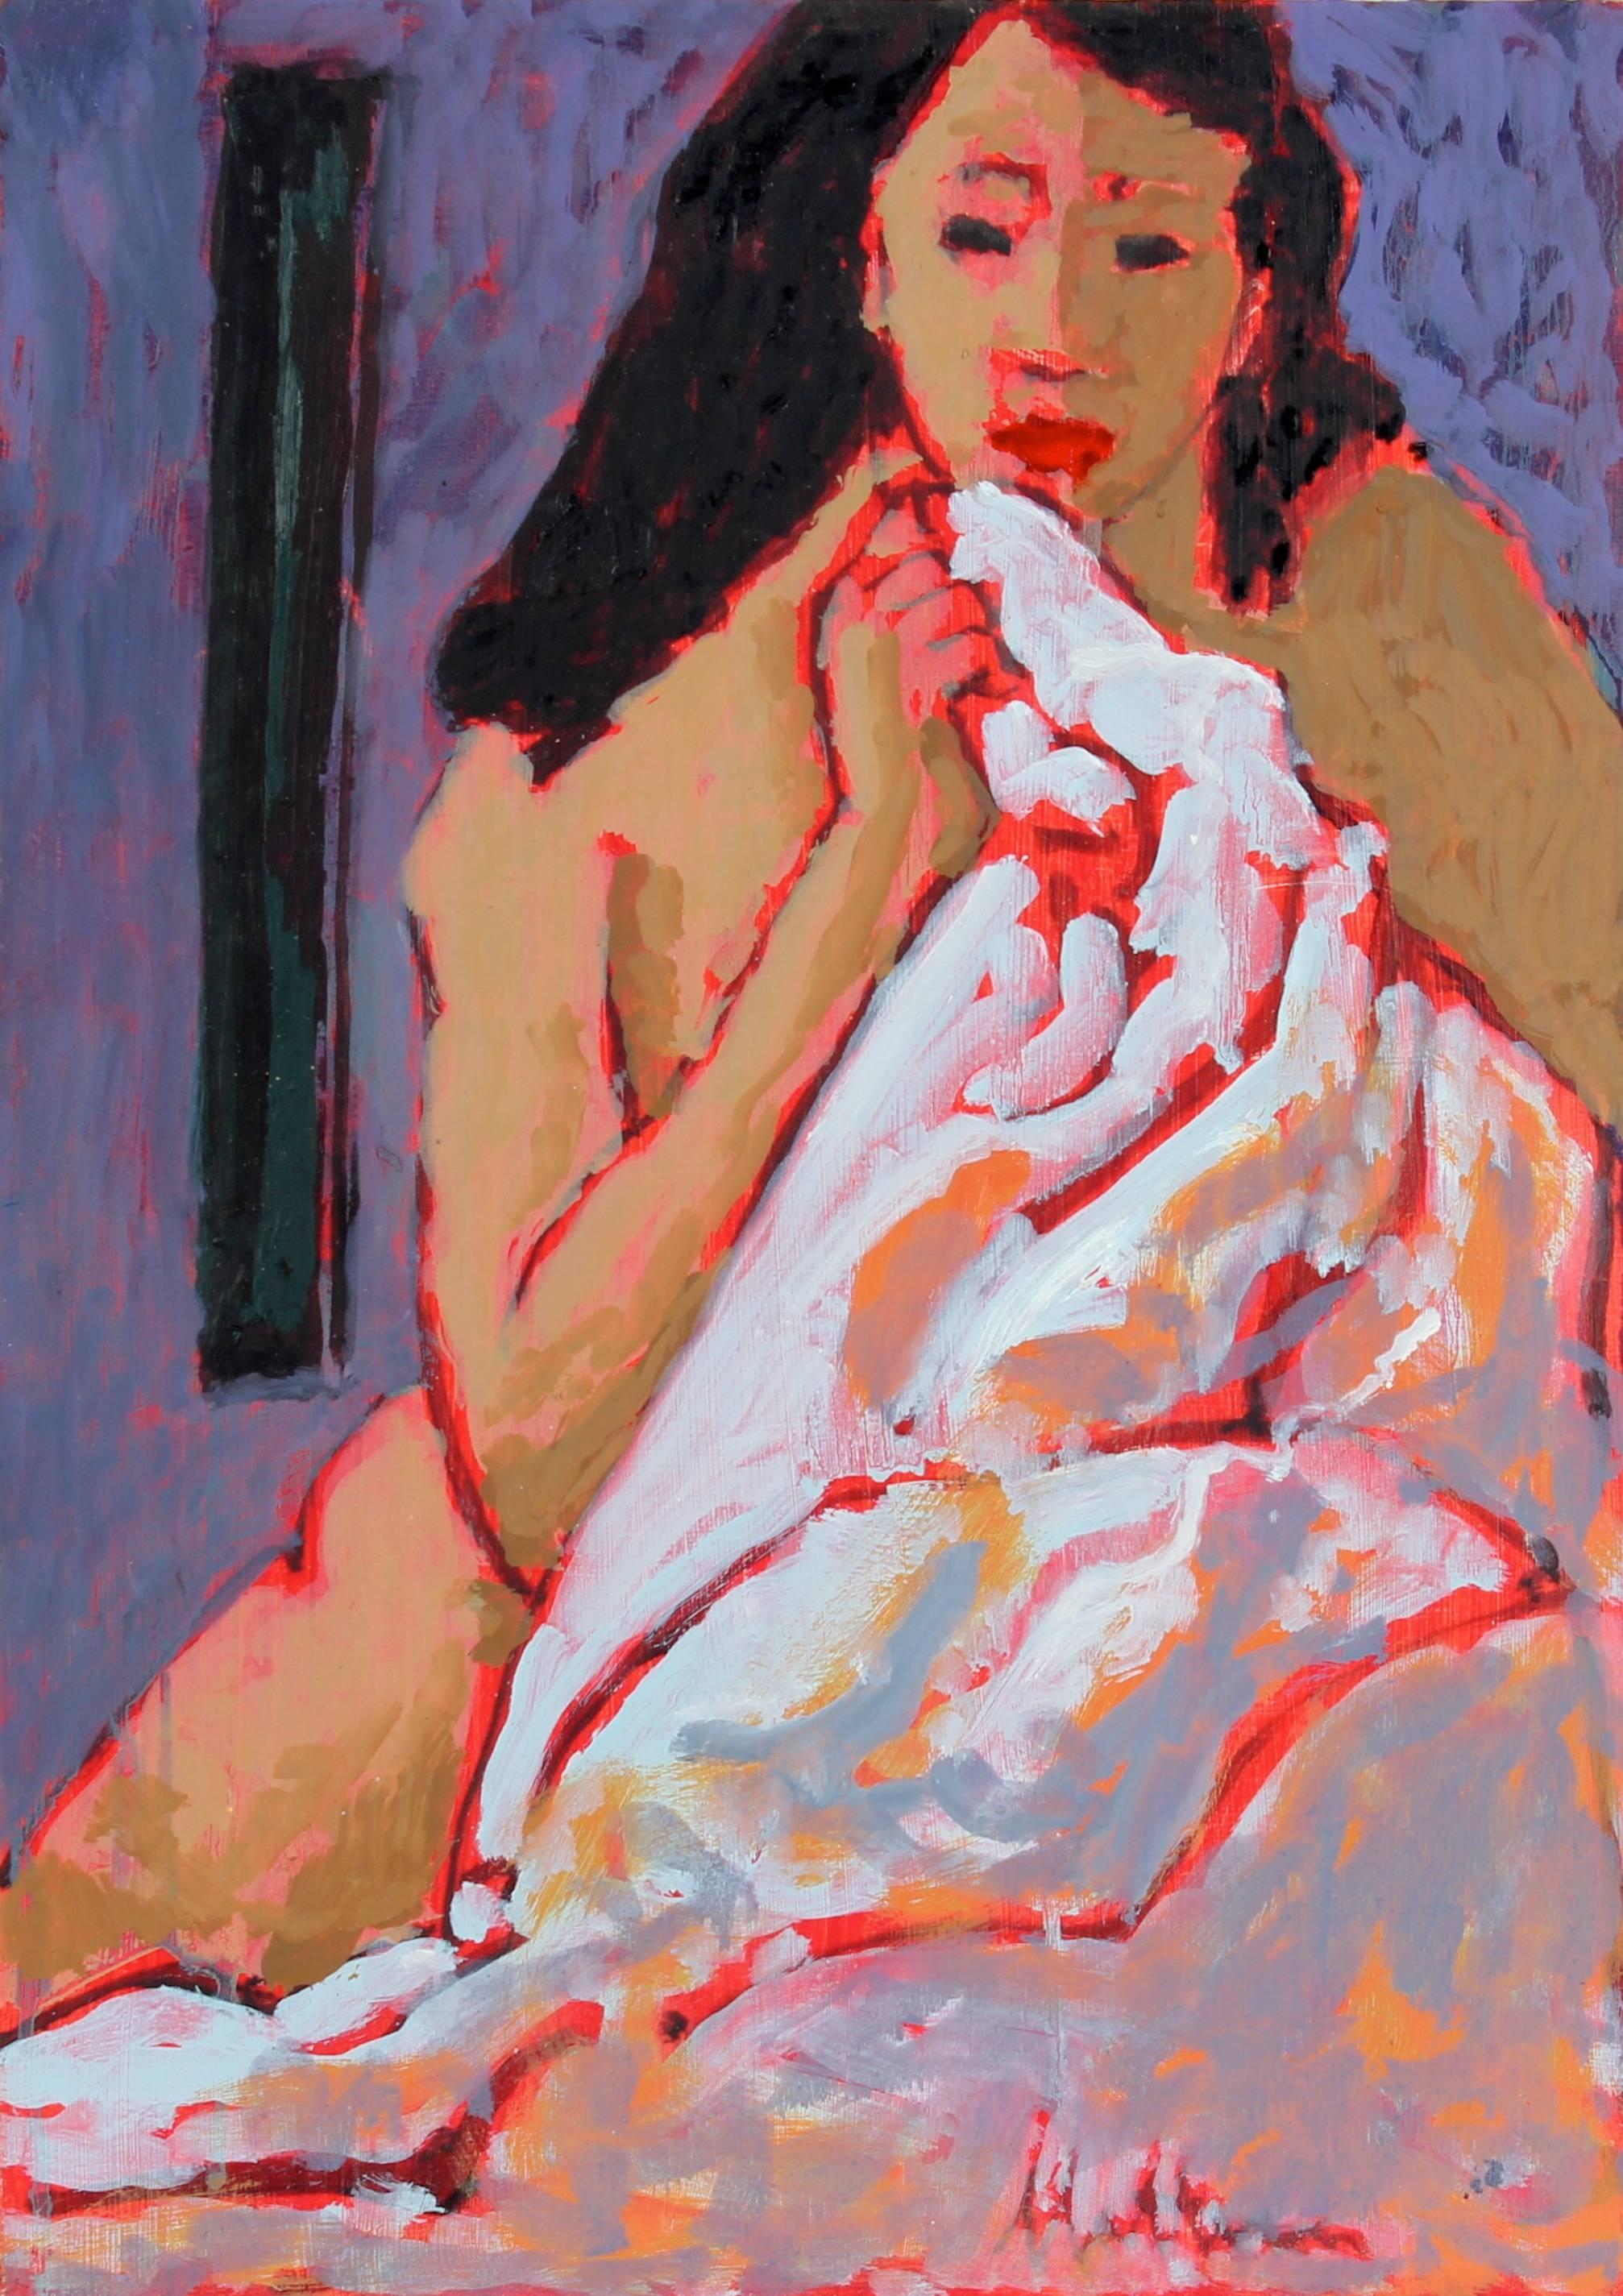 Rip Matteson Nude Painting - Female Figure in Bed, Oil Painting, 20th Century